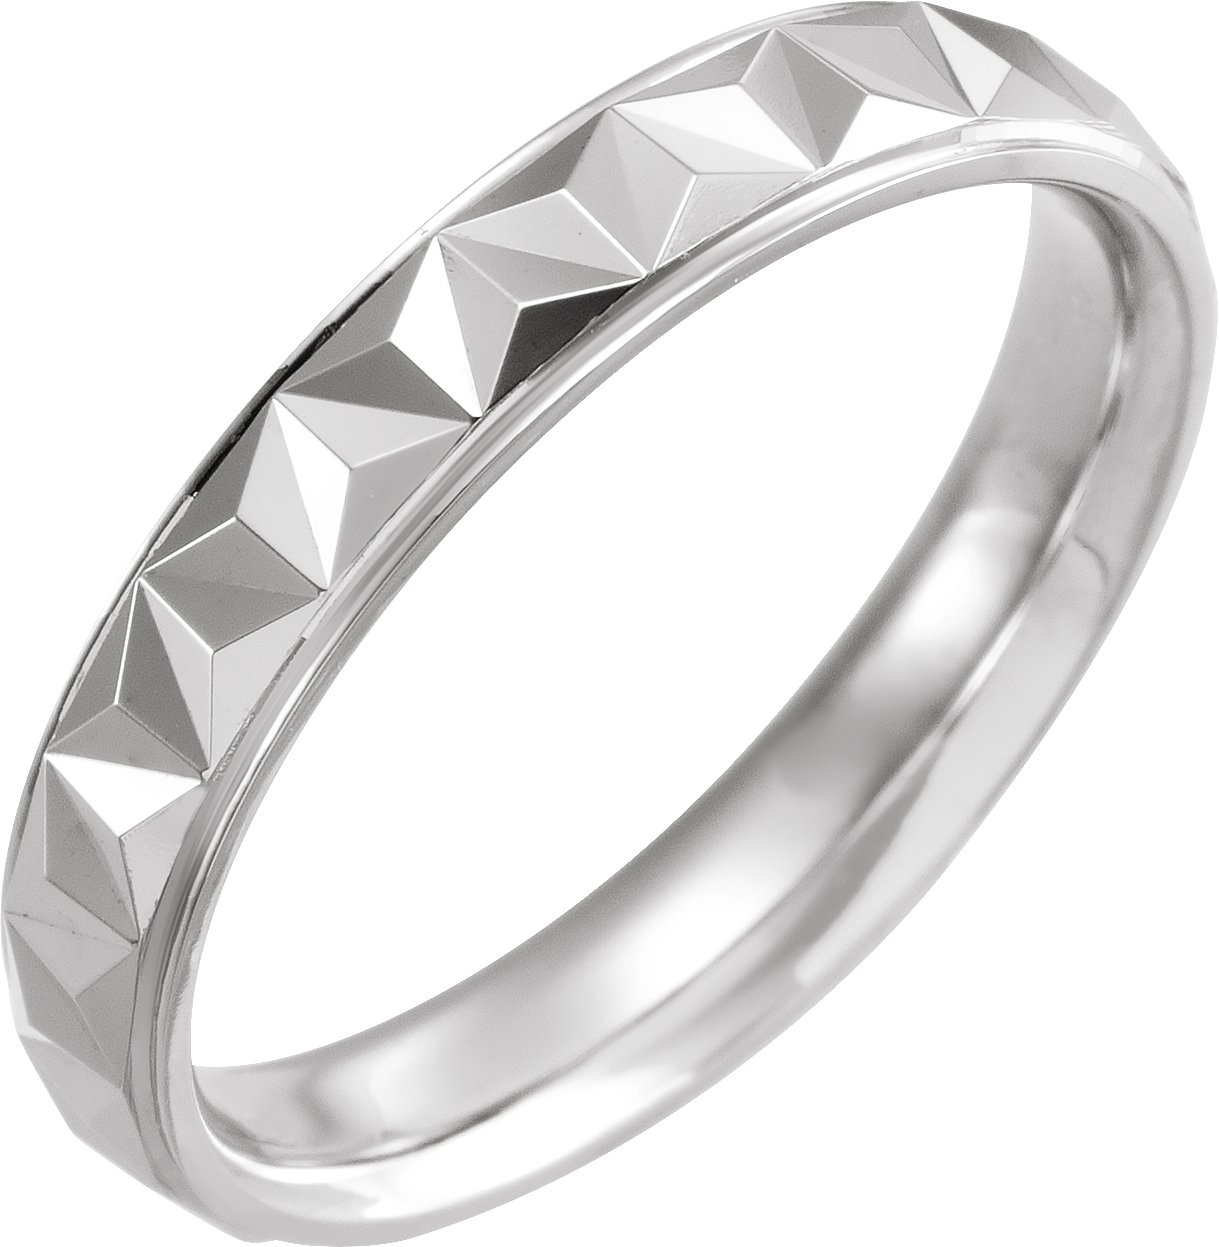 Continuum Sterling Silver 4 mm Geometric Band with Polished Finish Size 4